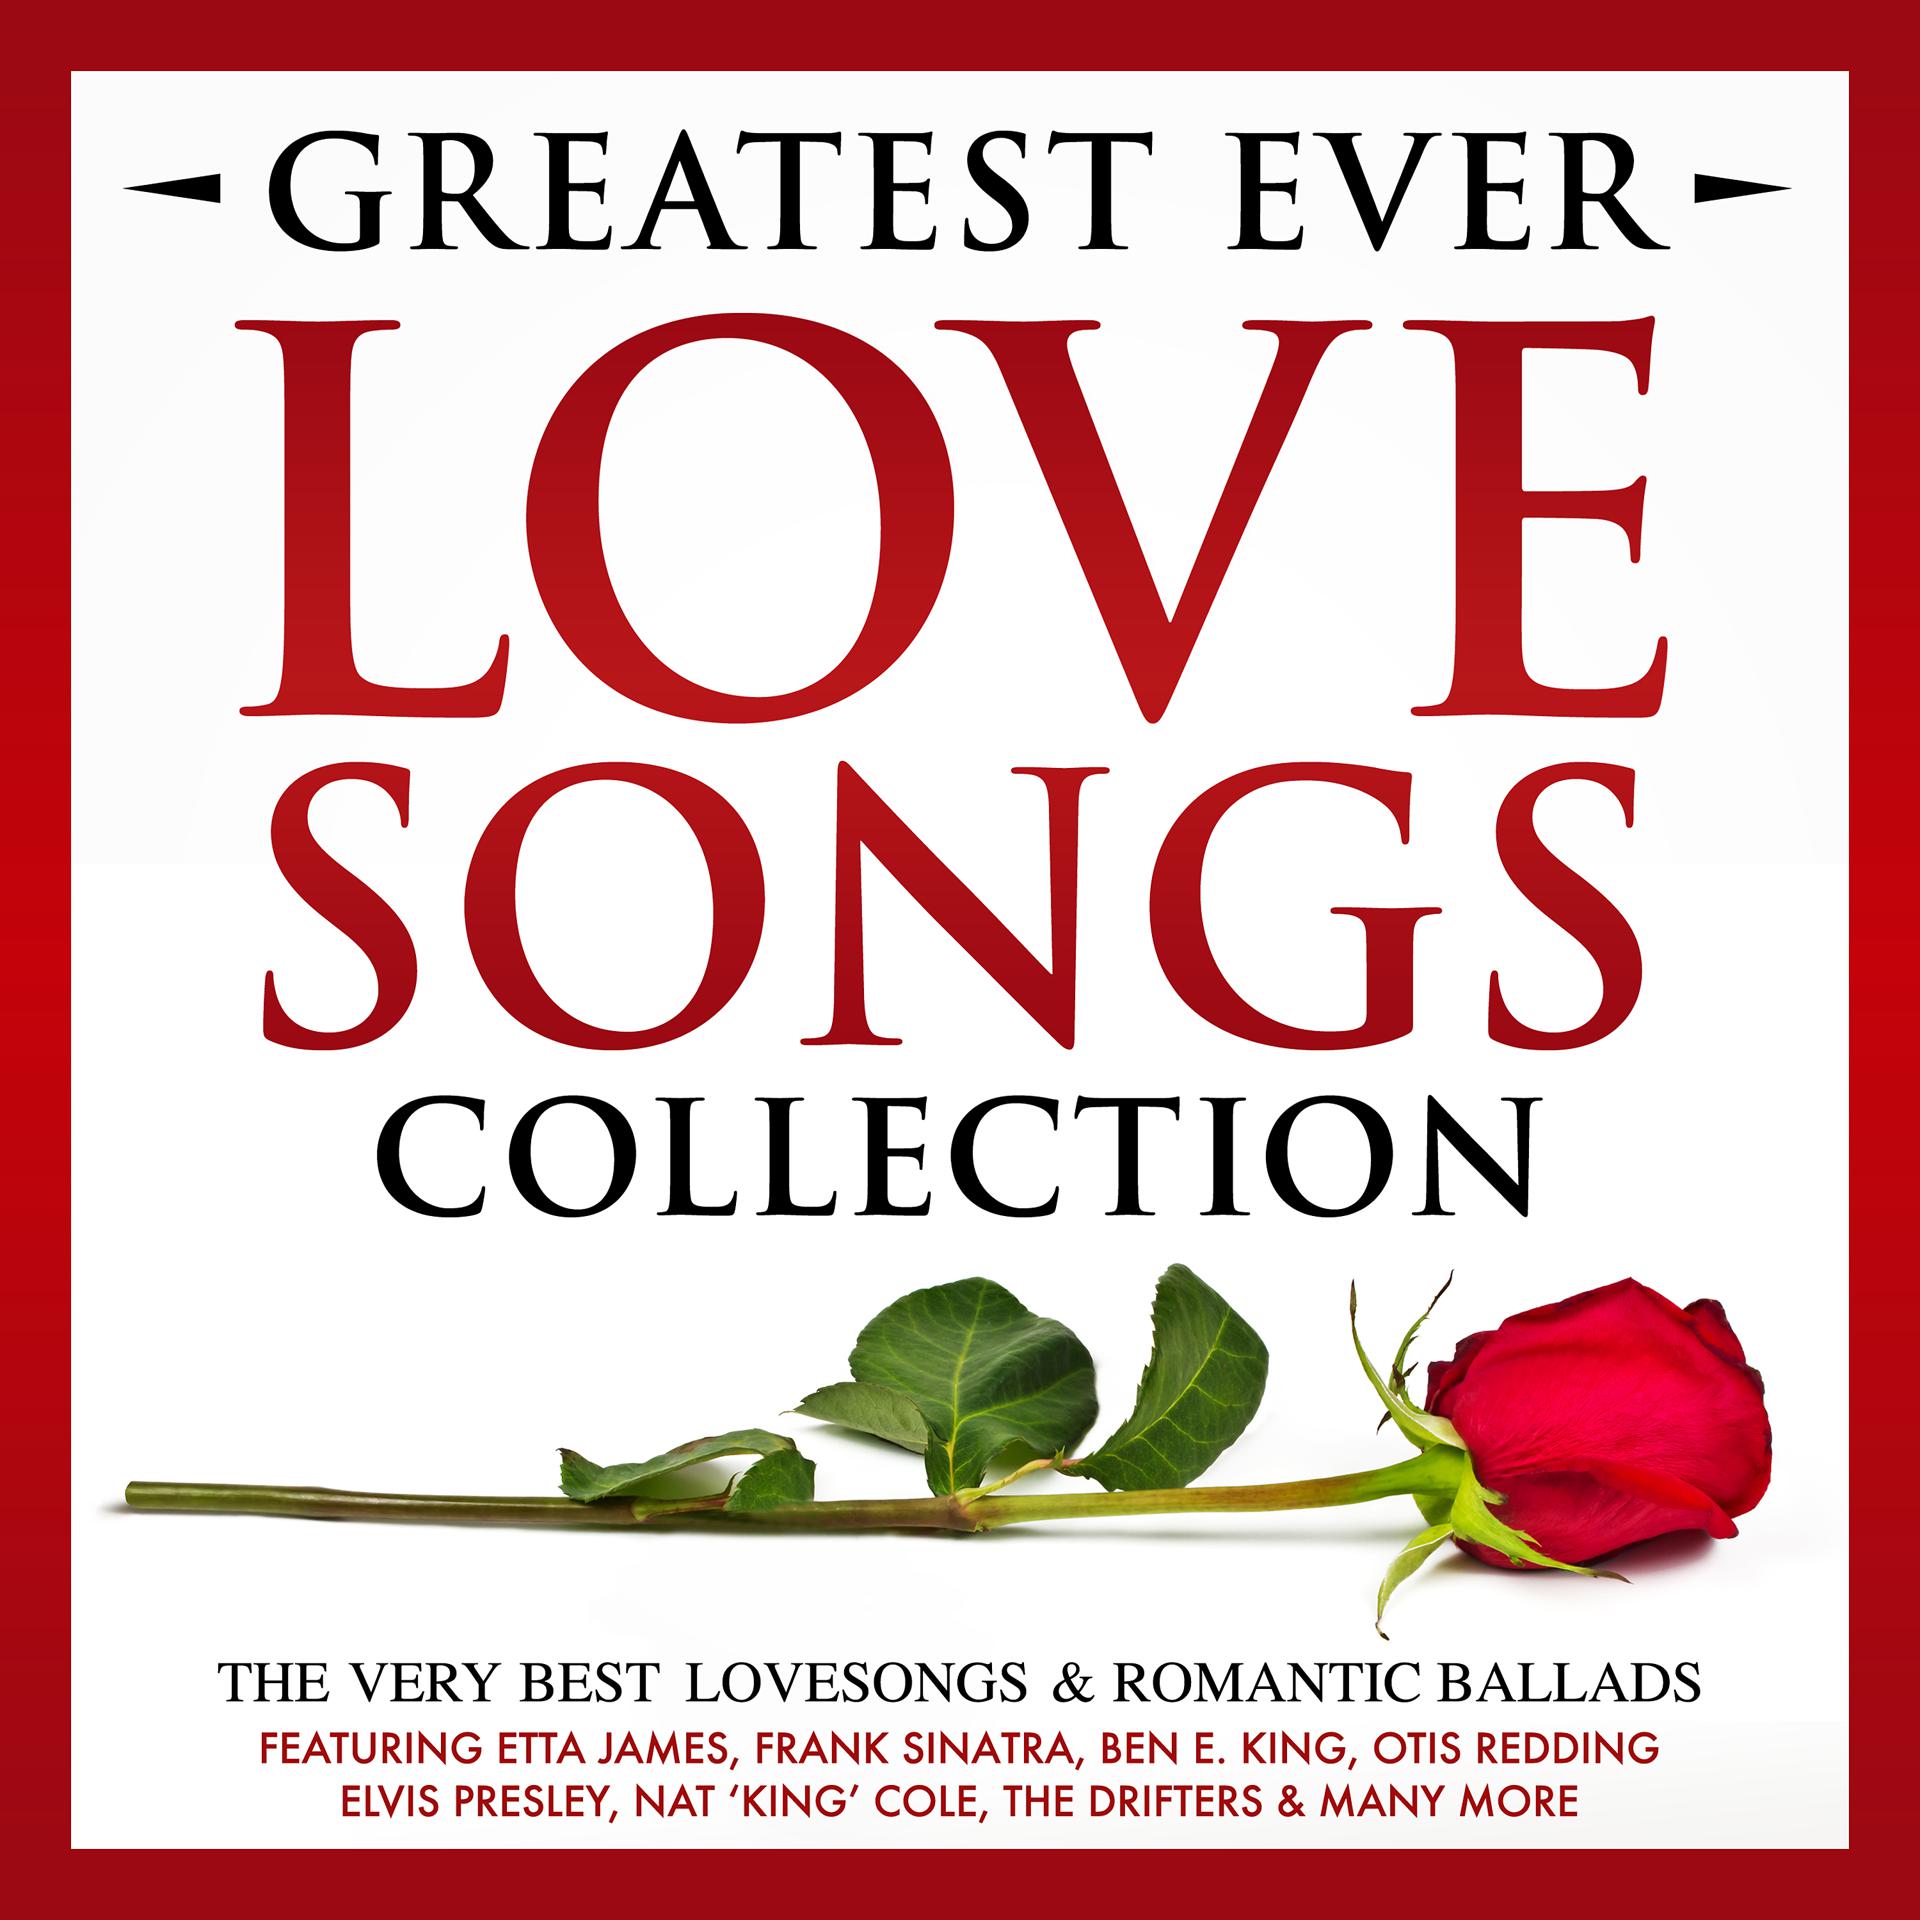 Постер альбома Greatest Ever Songs Love Collection - The Very Best Lovesongs & Romantic Ballads – Featuring Etta James, Frank Sinatra, Ben E. King, Otis Redding, Elvis Presley, Nat 'King' Cole, The Drifters & Many More